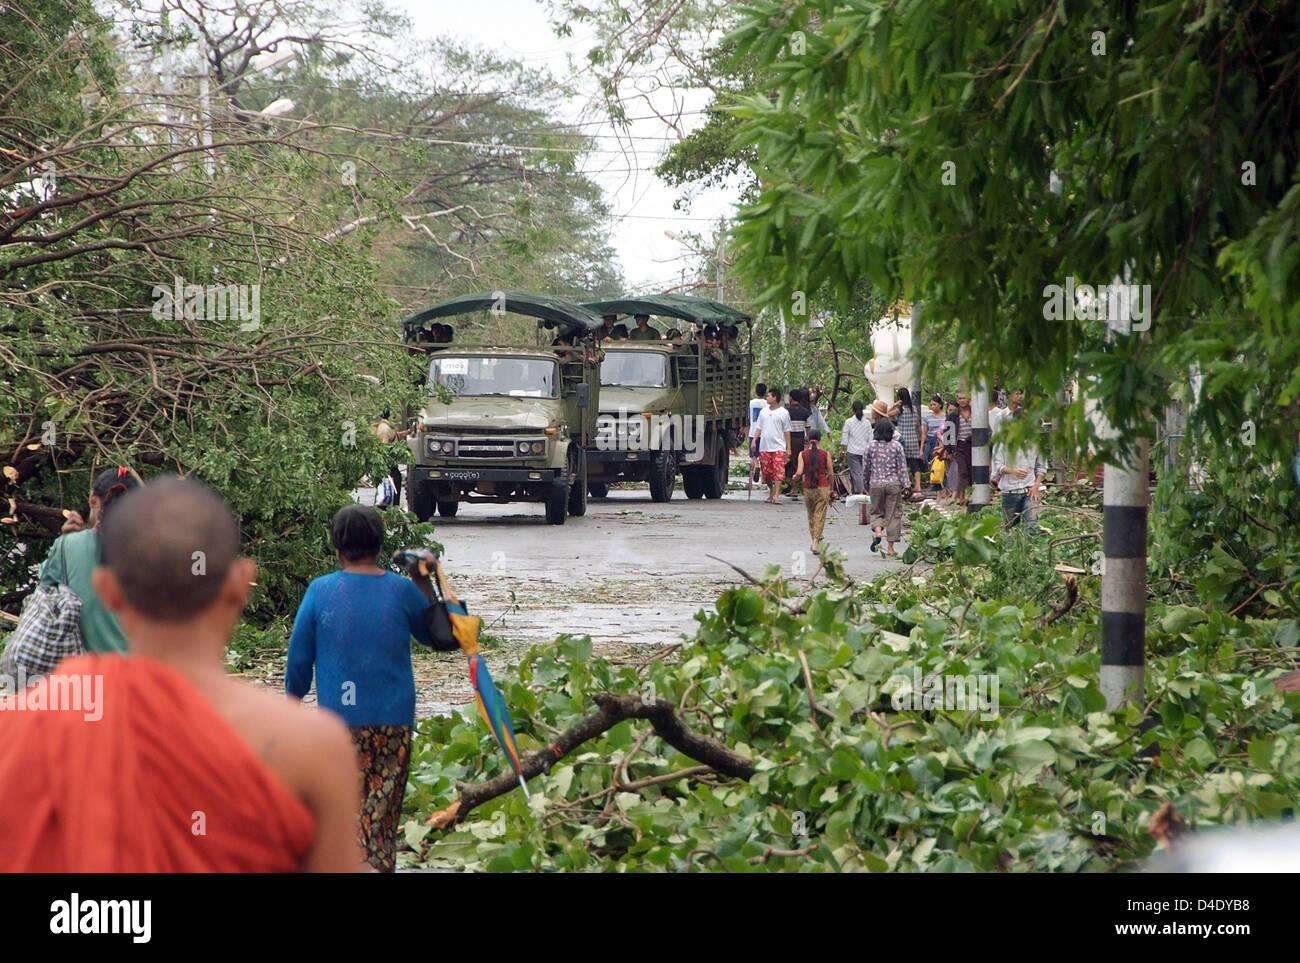 Citizens and military lorries work their way through trees and other debris blocking a street in Yangon, Myanmar, 5 May 2008. International aid has begun after cyclone 'Nargis' devastated Myanmar, though the exact situation in the country, which is isolated from the outside world by the military junta, remains unclear. Most traffic routes are blocked, Myanmar's government assumes t Stock Photo